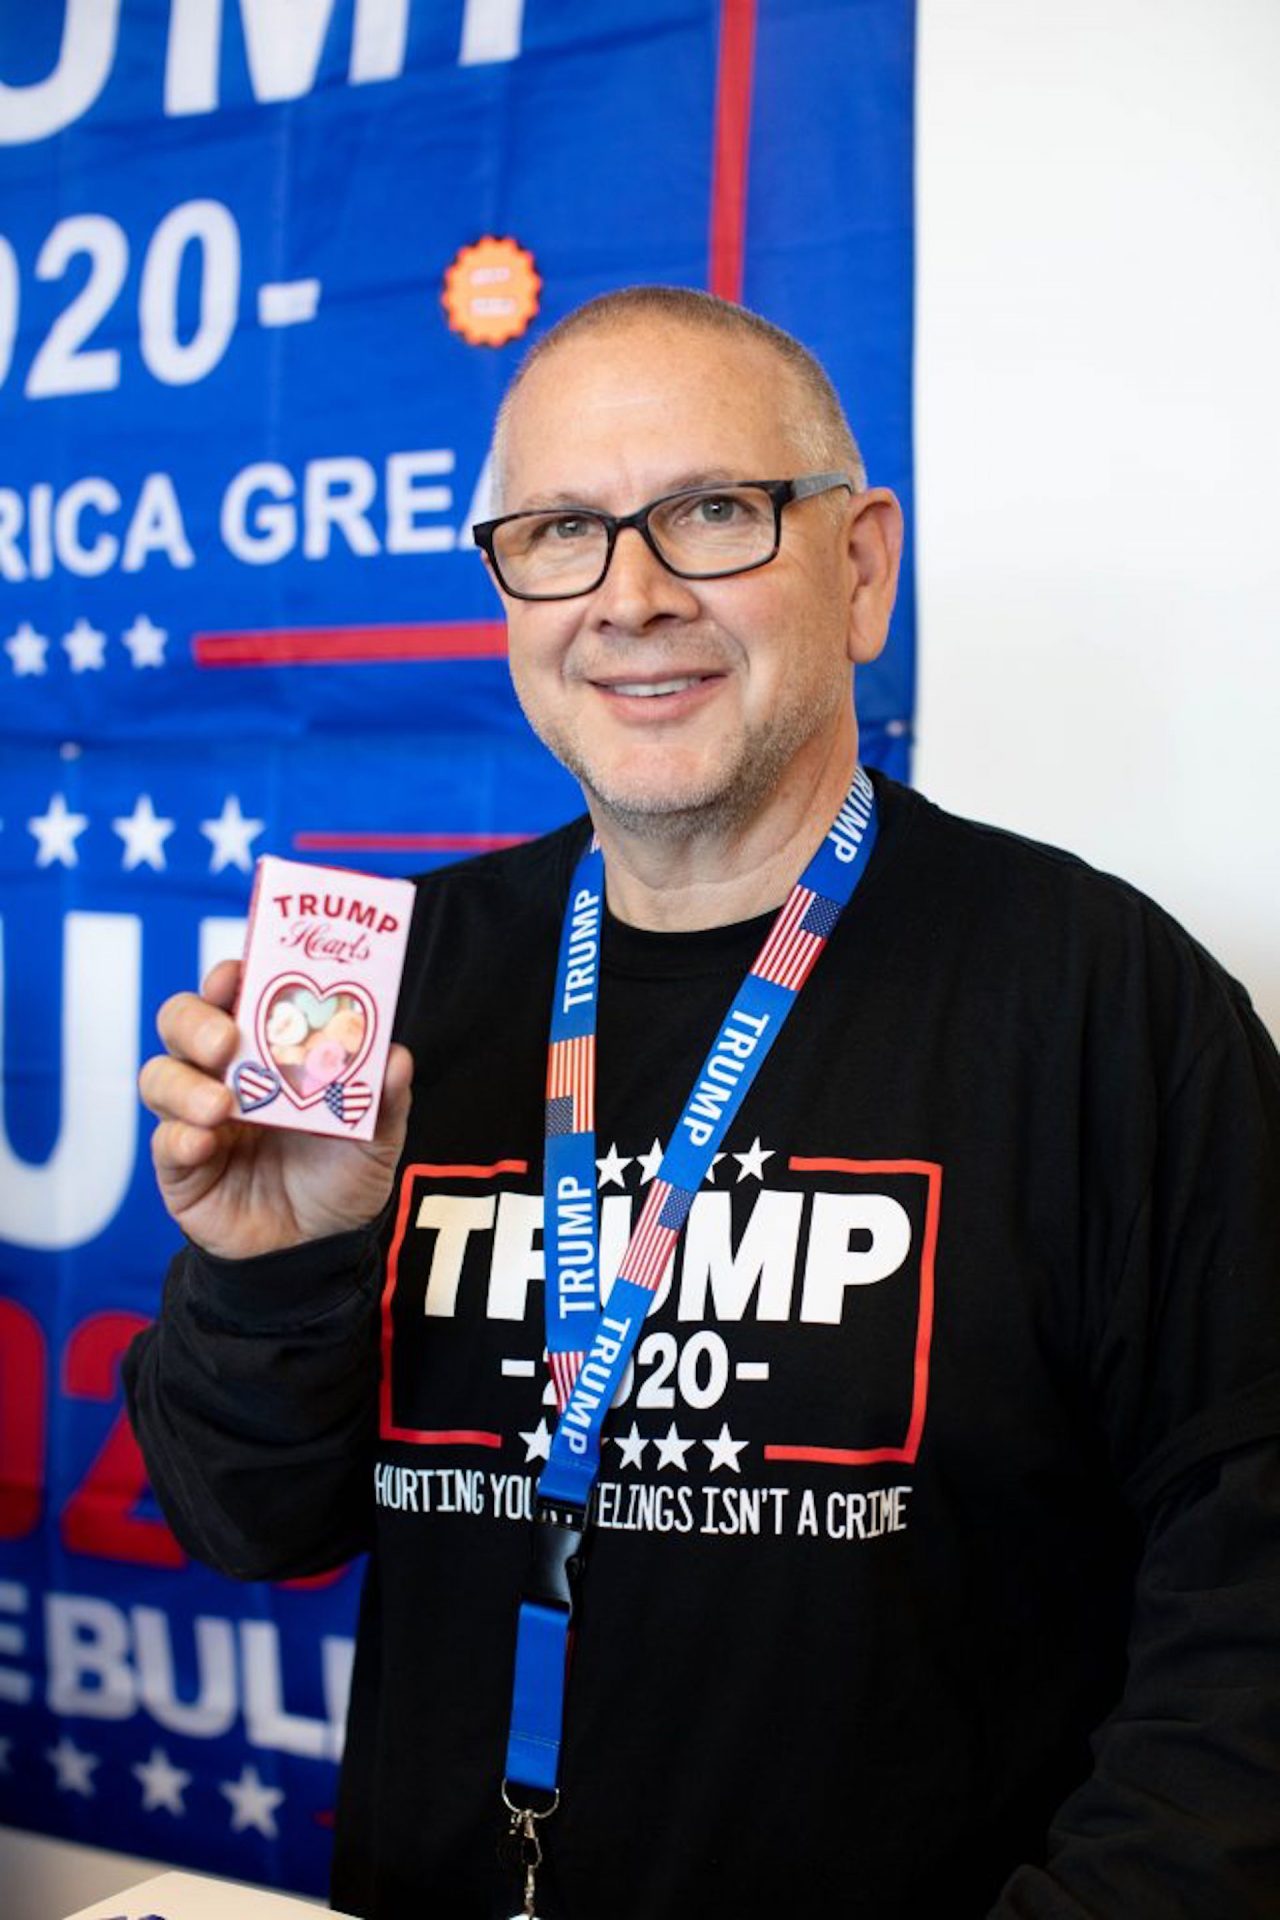 Michael Domanico, the owner of the Trump Store in Bensalem, holds “Trump hearts” for Valentine’s Day.